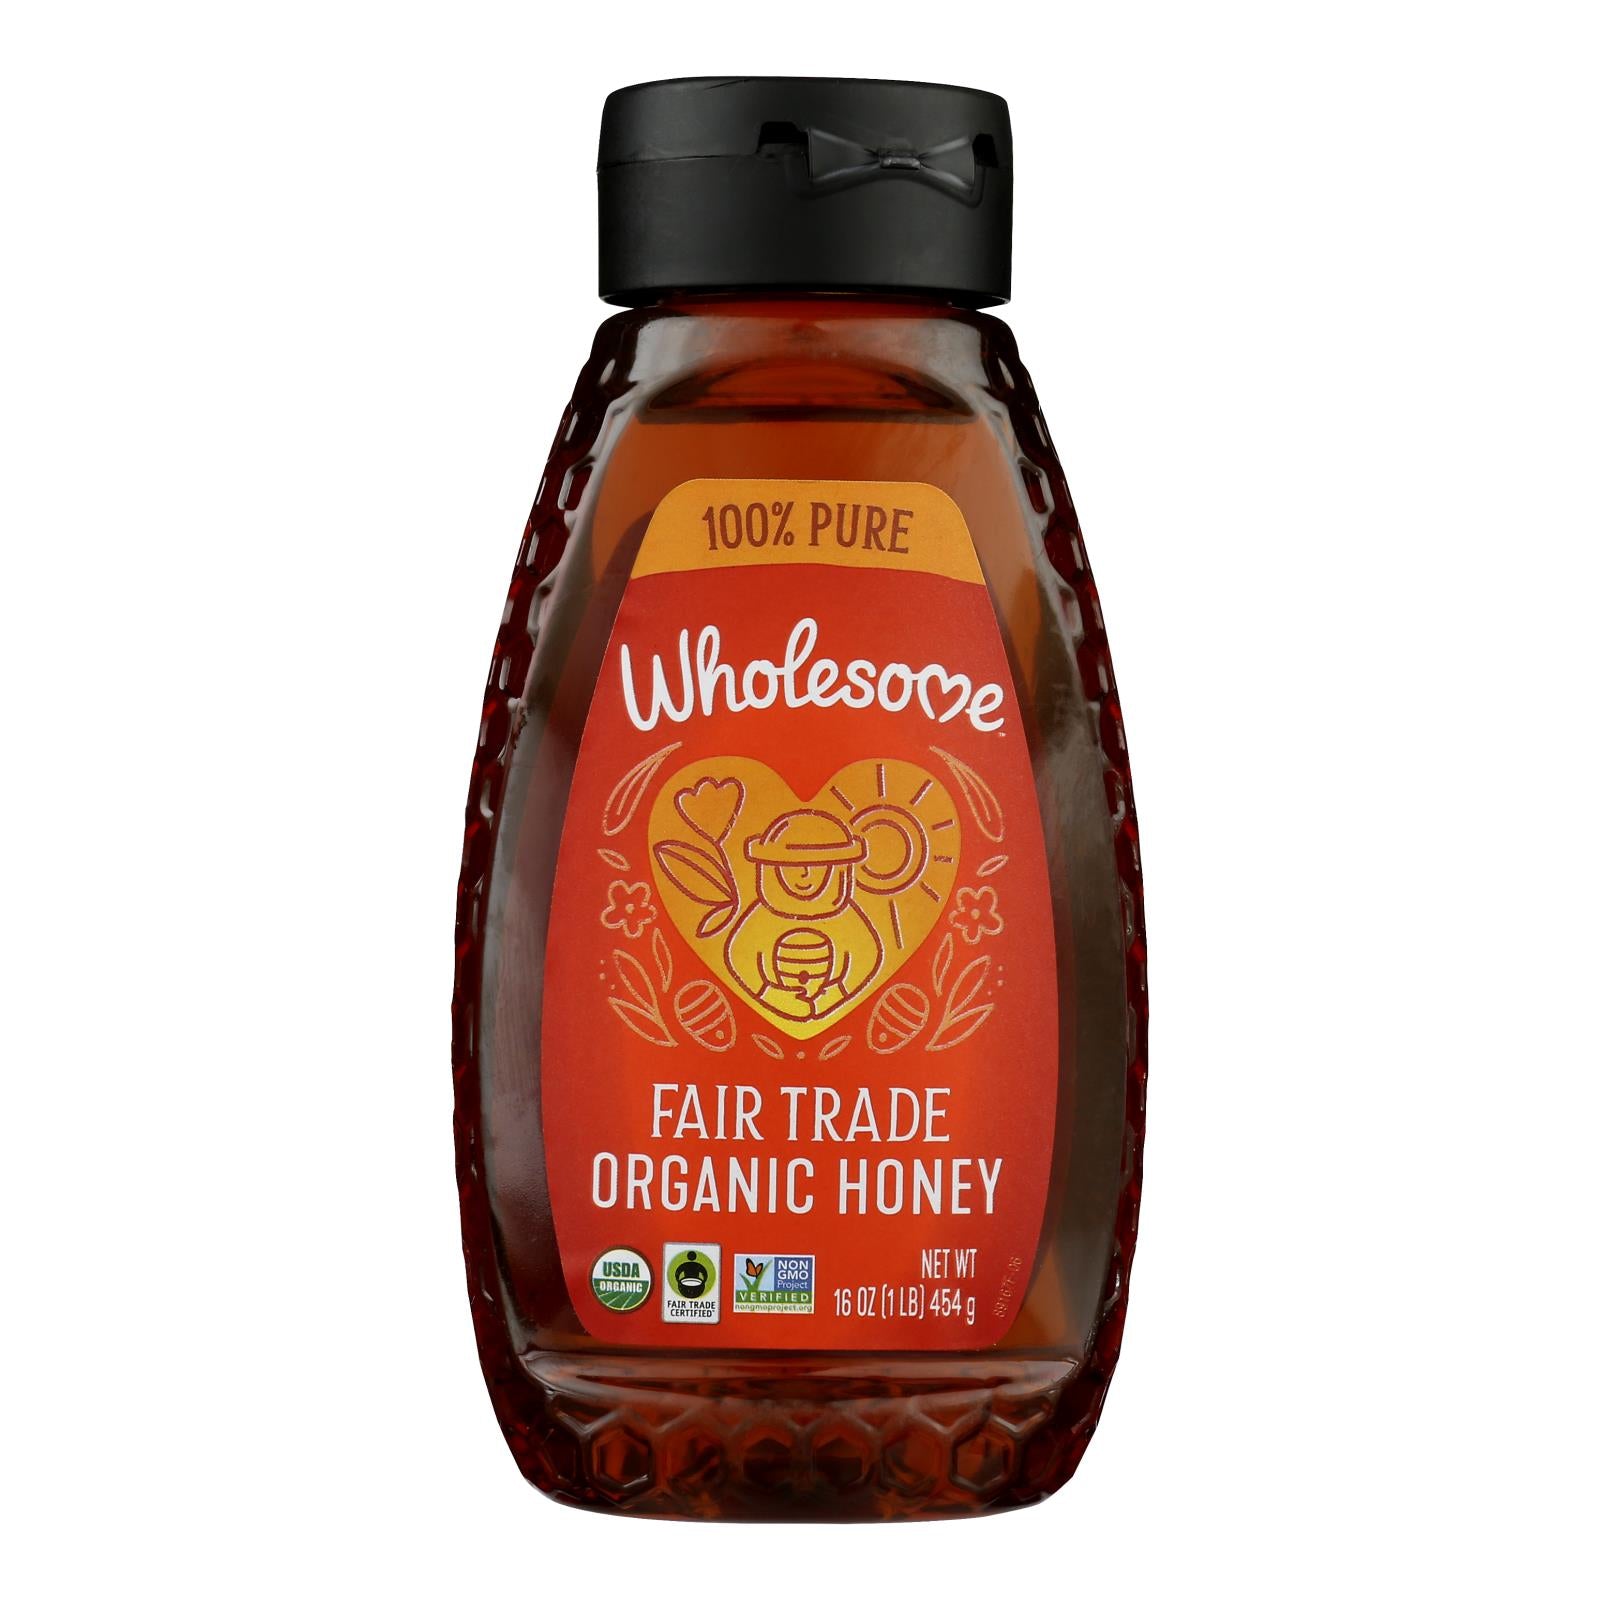 Wholesome Sweeteners Honey - Organic - Amber - Squeeze Bottle - 16 Oz - Case Of 6